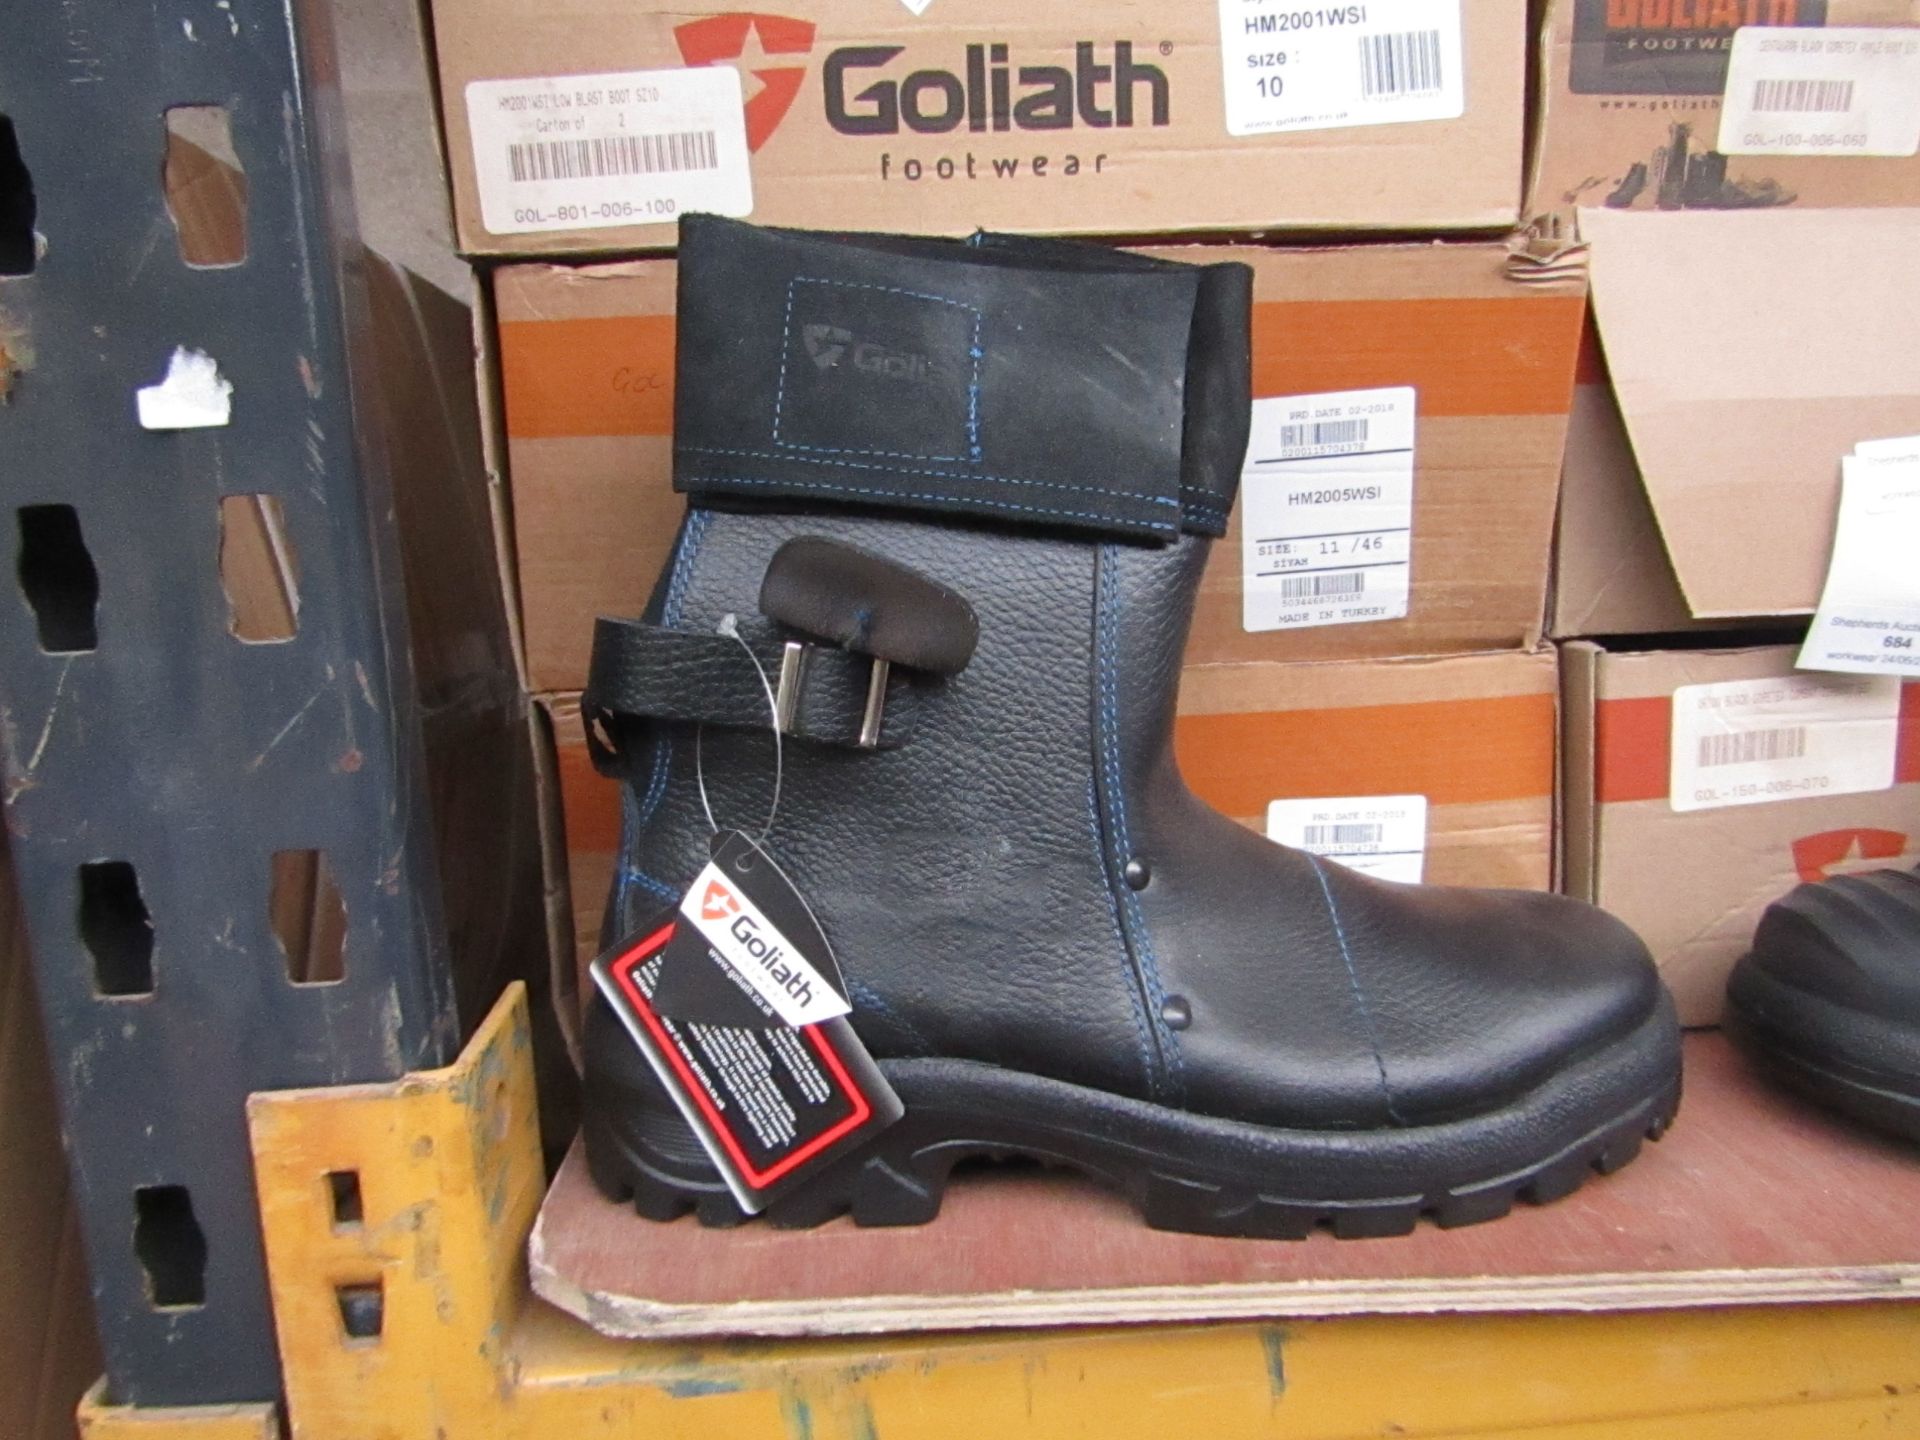 Goliath ankle boot with steel midsole, size 10, new and boxed. RRP £57.49